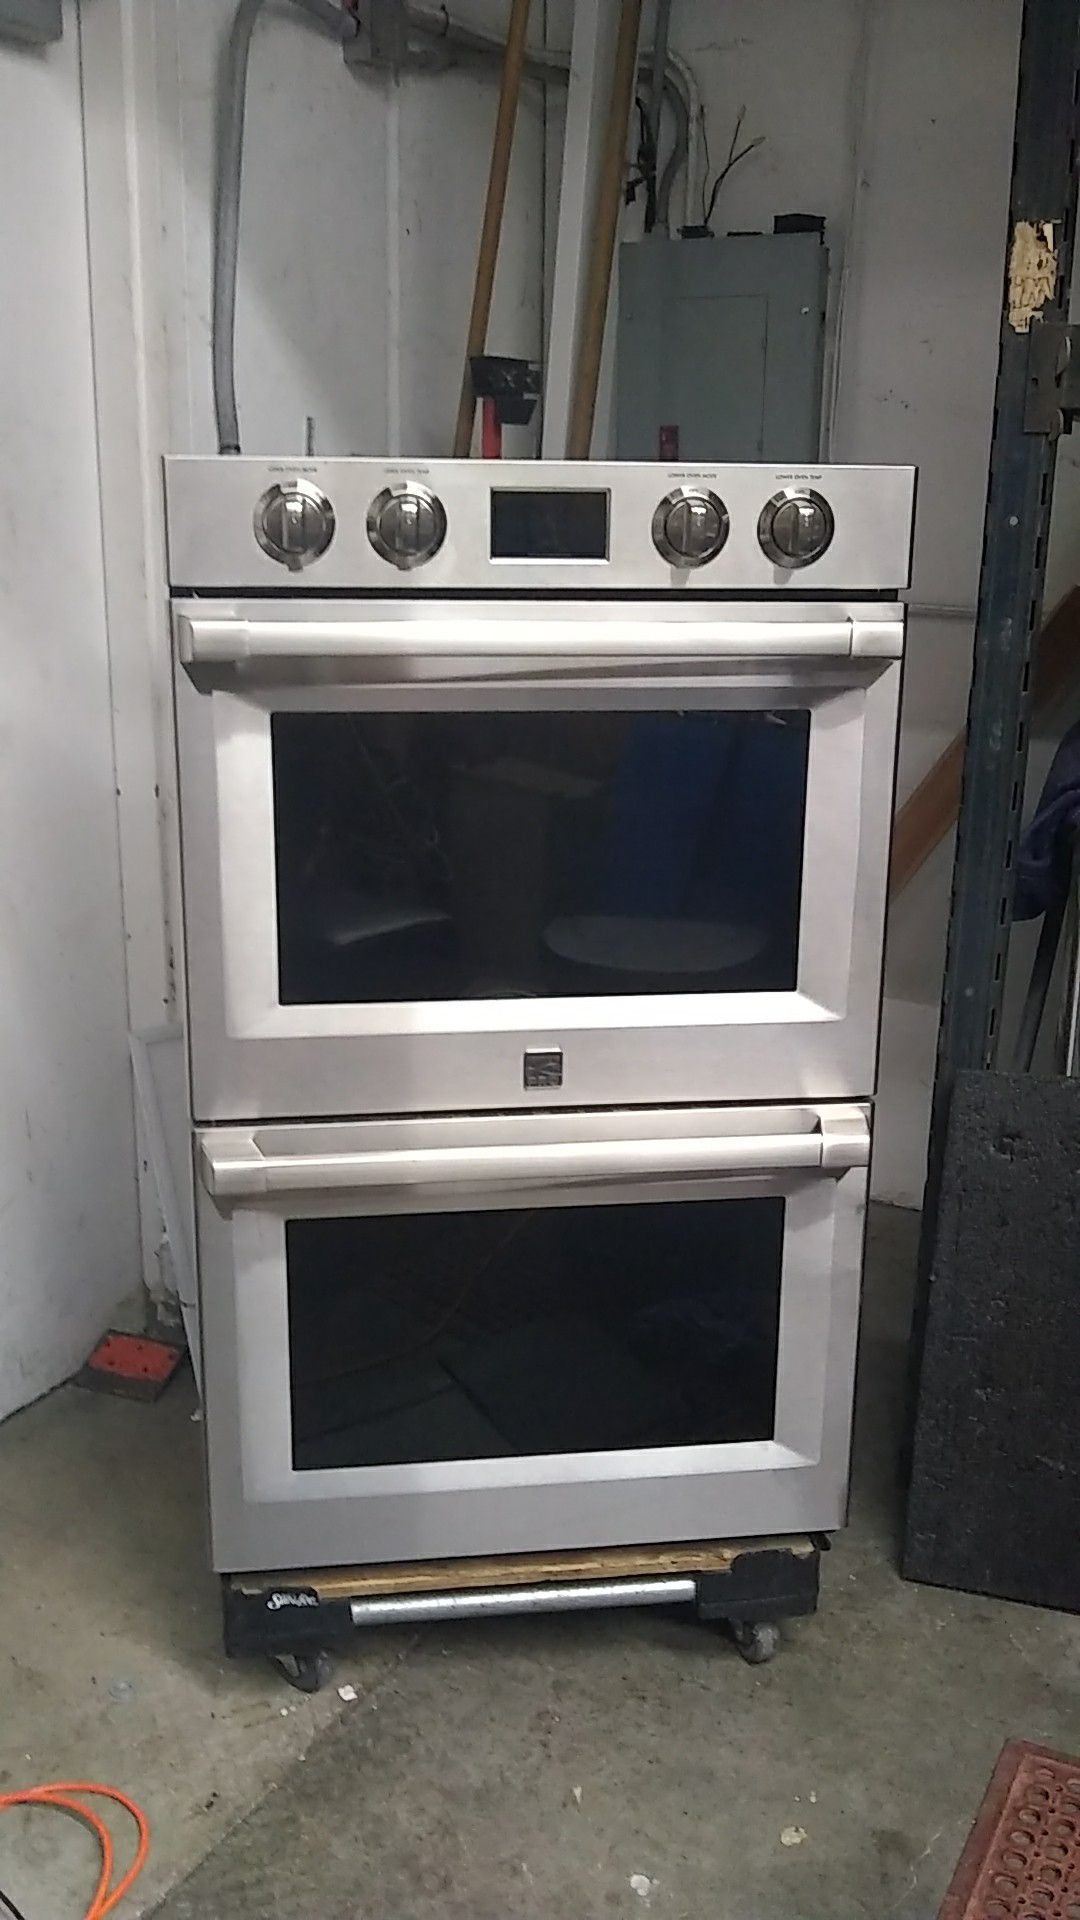 Kenmore Pro Double Oven 30"